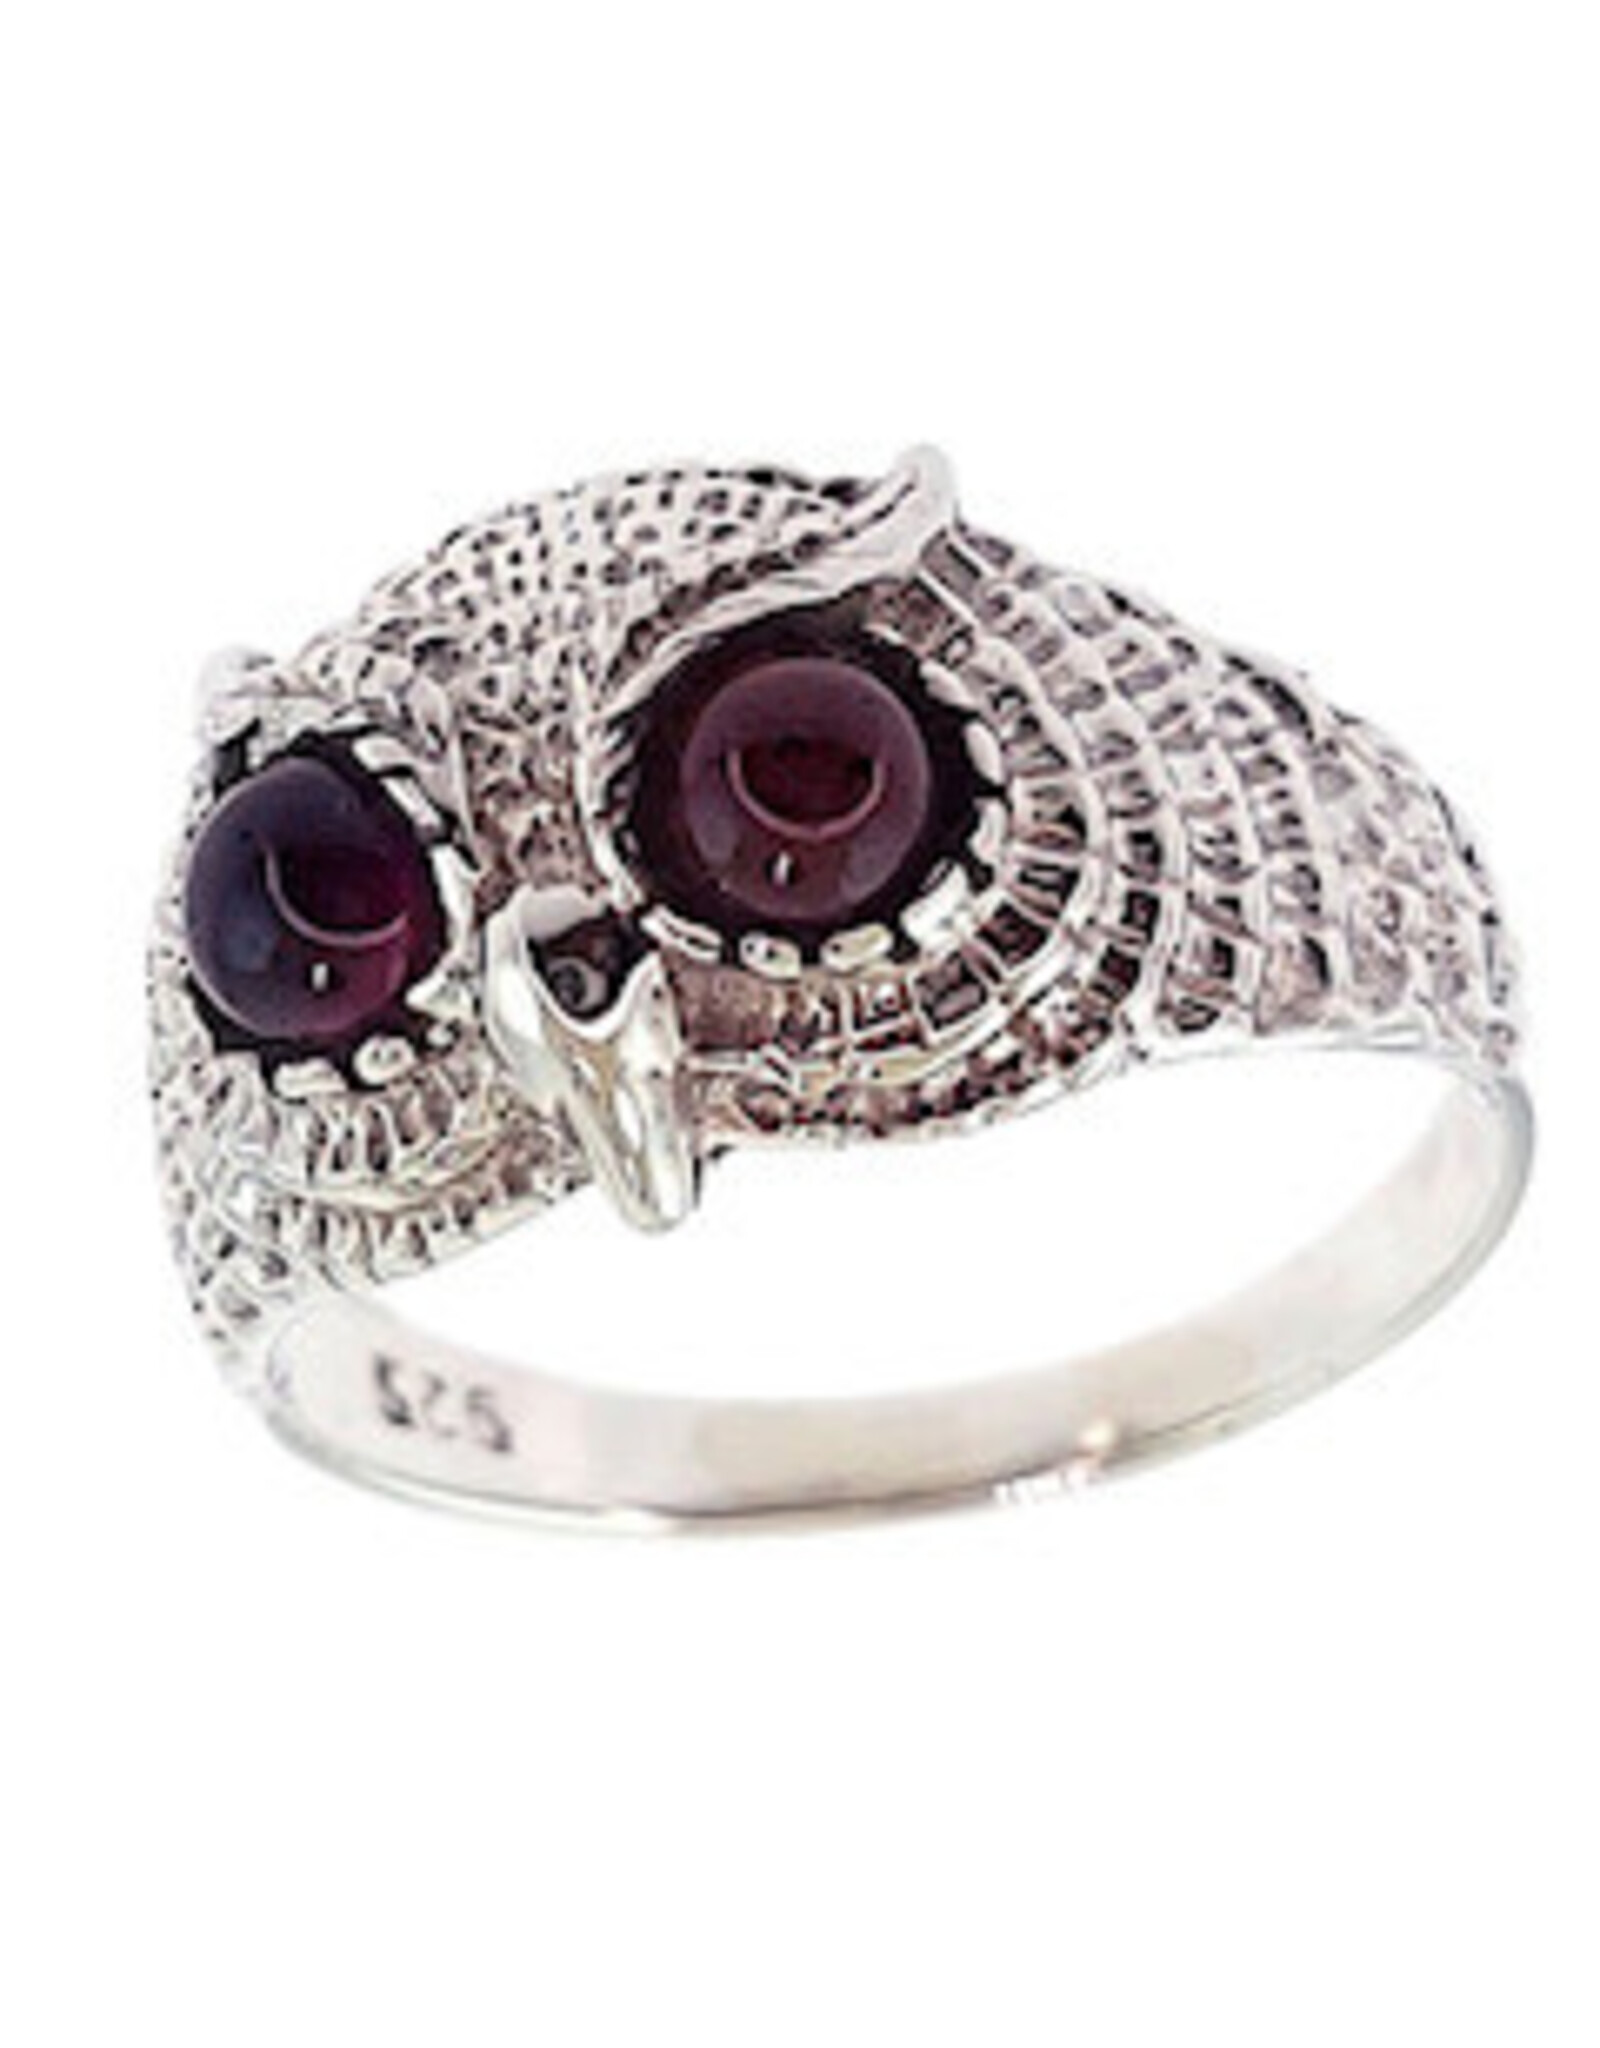 Natures Wisdom Owl with Garnet Sterling Silver Ring